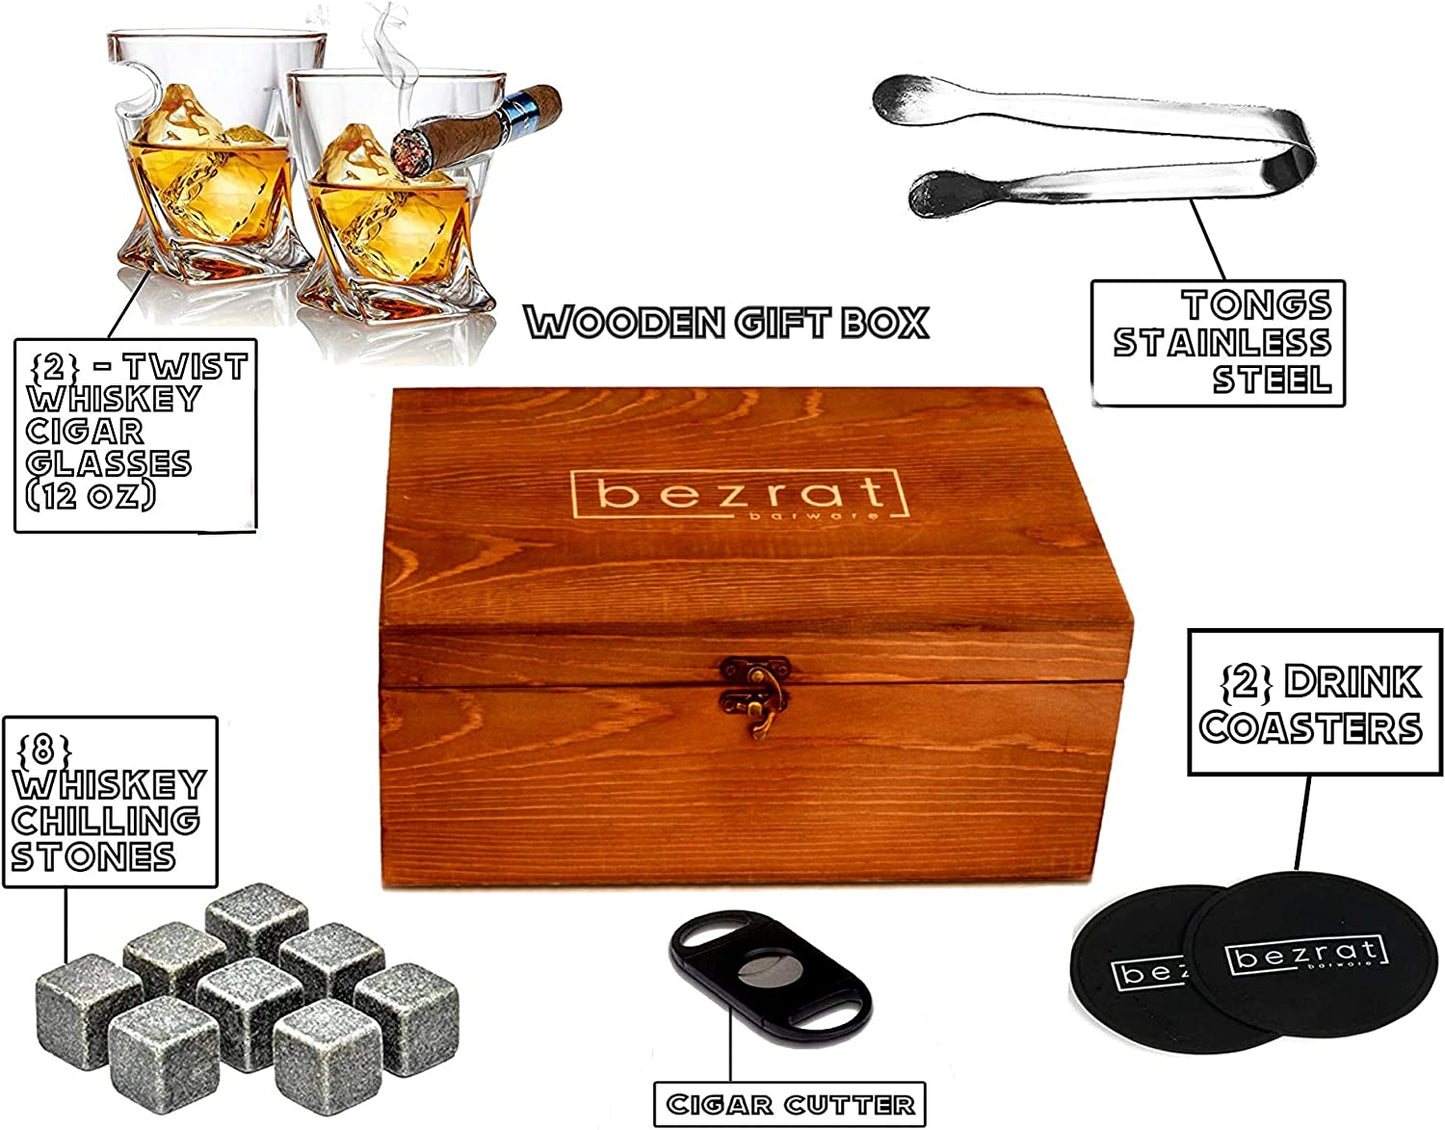 Old Fashioned Whiskey Cigar Glasses with Side Mounted Cigar Holder + Whisky Chilling Stones and Accessories in Wooden Box - Scotch Bourbon Set for Dad, Husband, Fathers Day, Birthday Gift Set